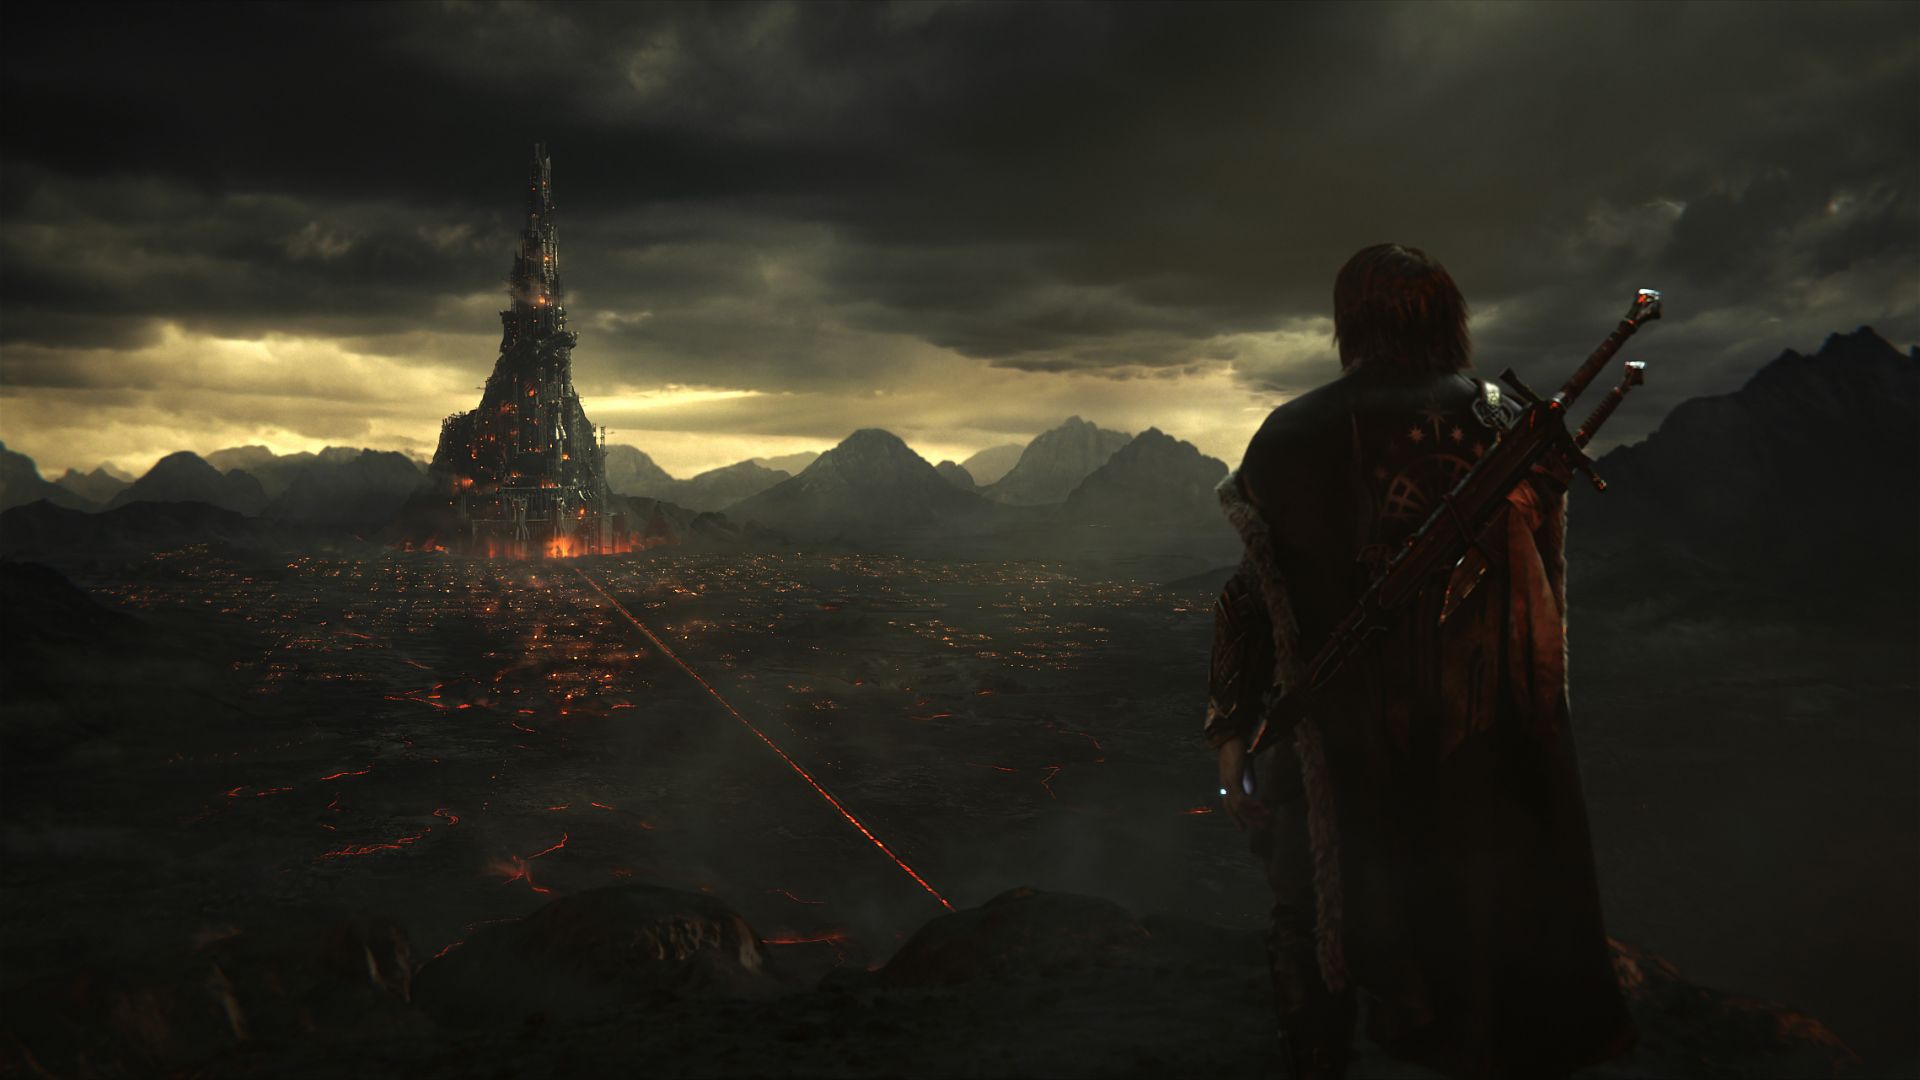 Wallpaper Middle-earth: shadow of war, talion, dark tower